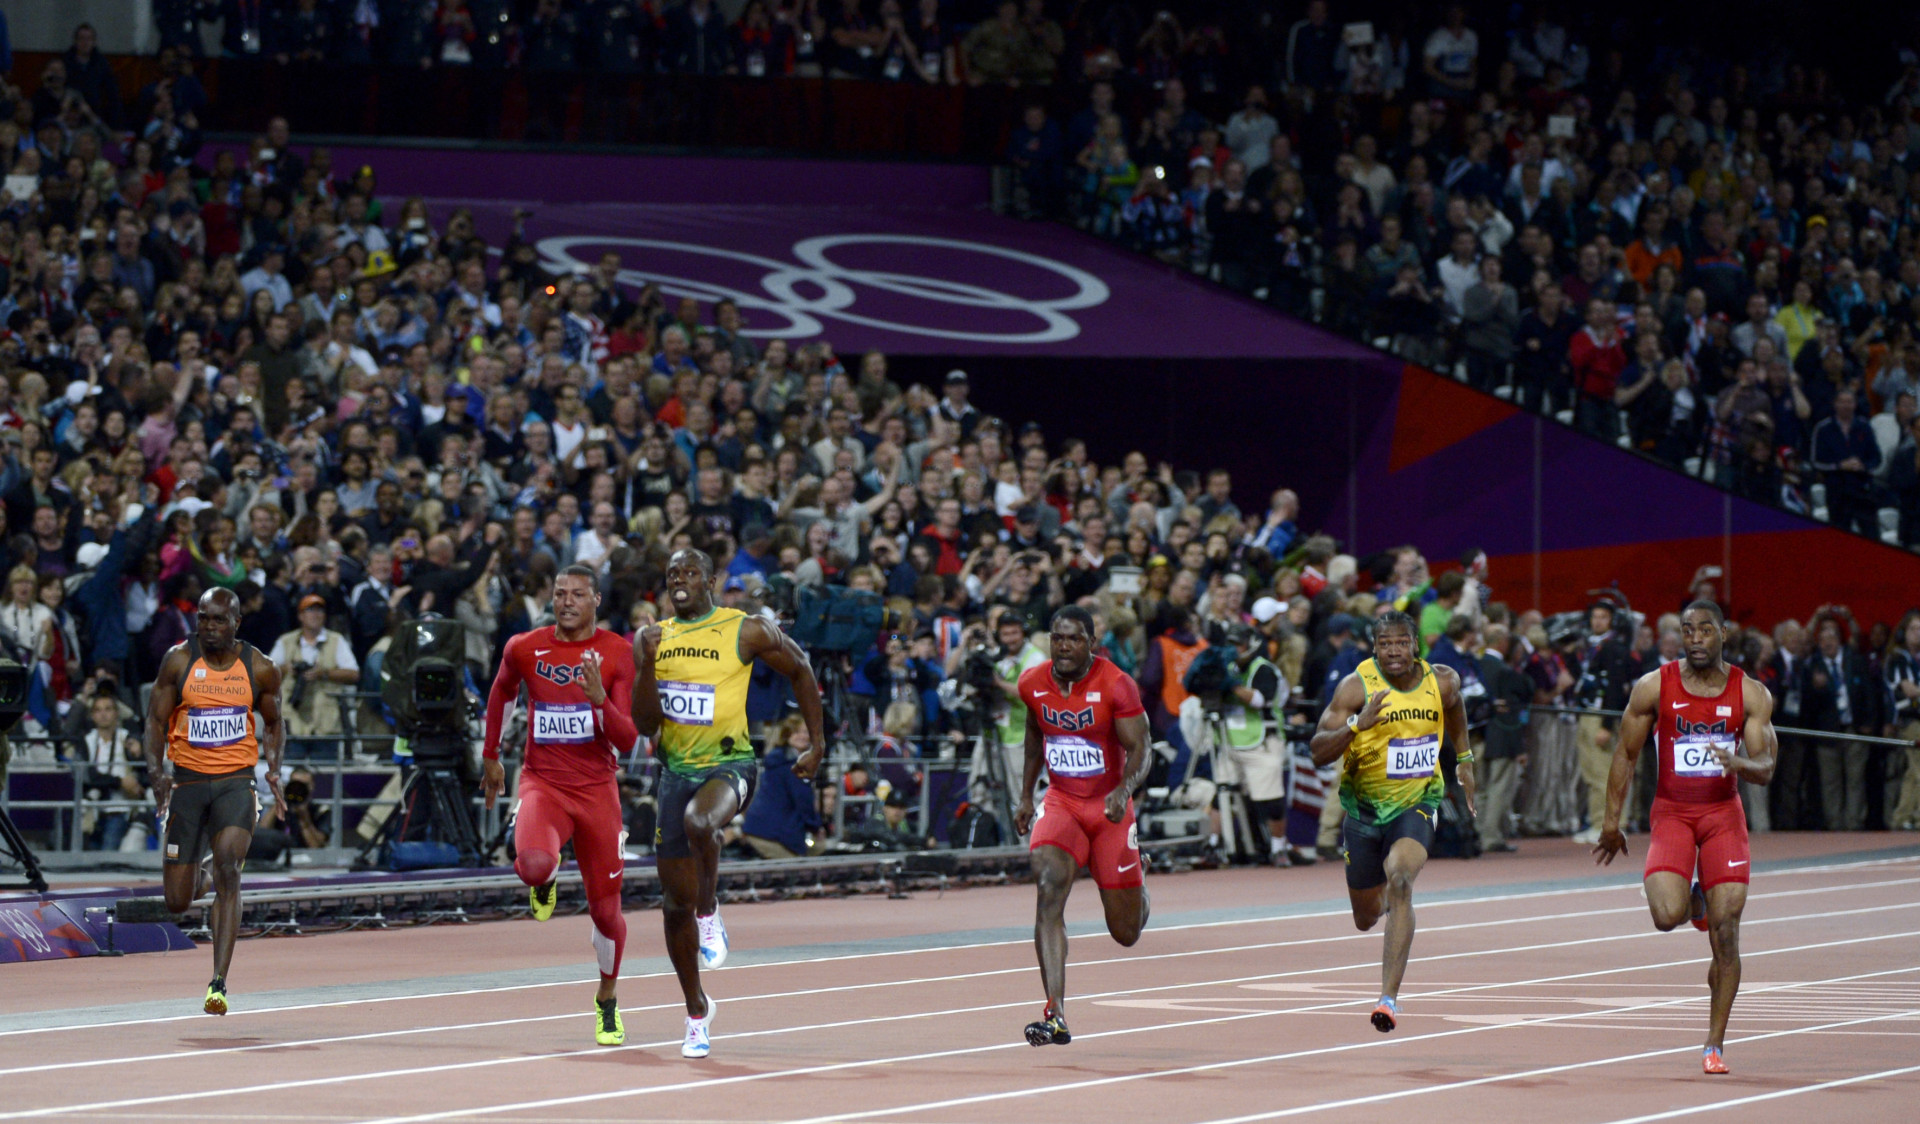 Usain Bolt of Jamaica pulls away to victory and a repeat gold medal in the Men's 100 Meter final at the 2012 London Olympics. : London Olympics : Photography by Adam Stoltman: Sports Photography, The Arts, Portraiture, Travel, Photojournalism and Fine Art in New York